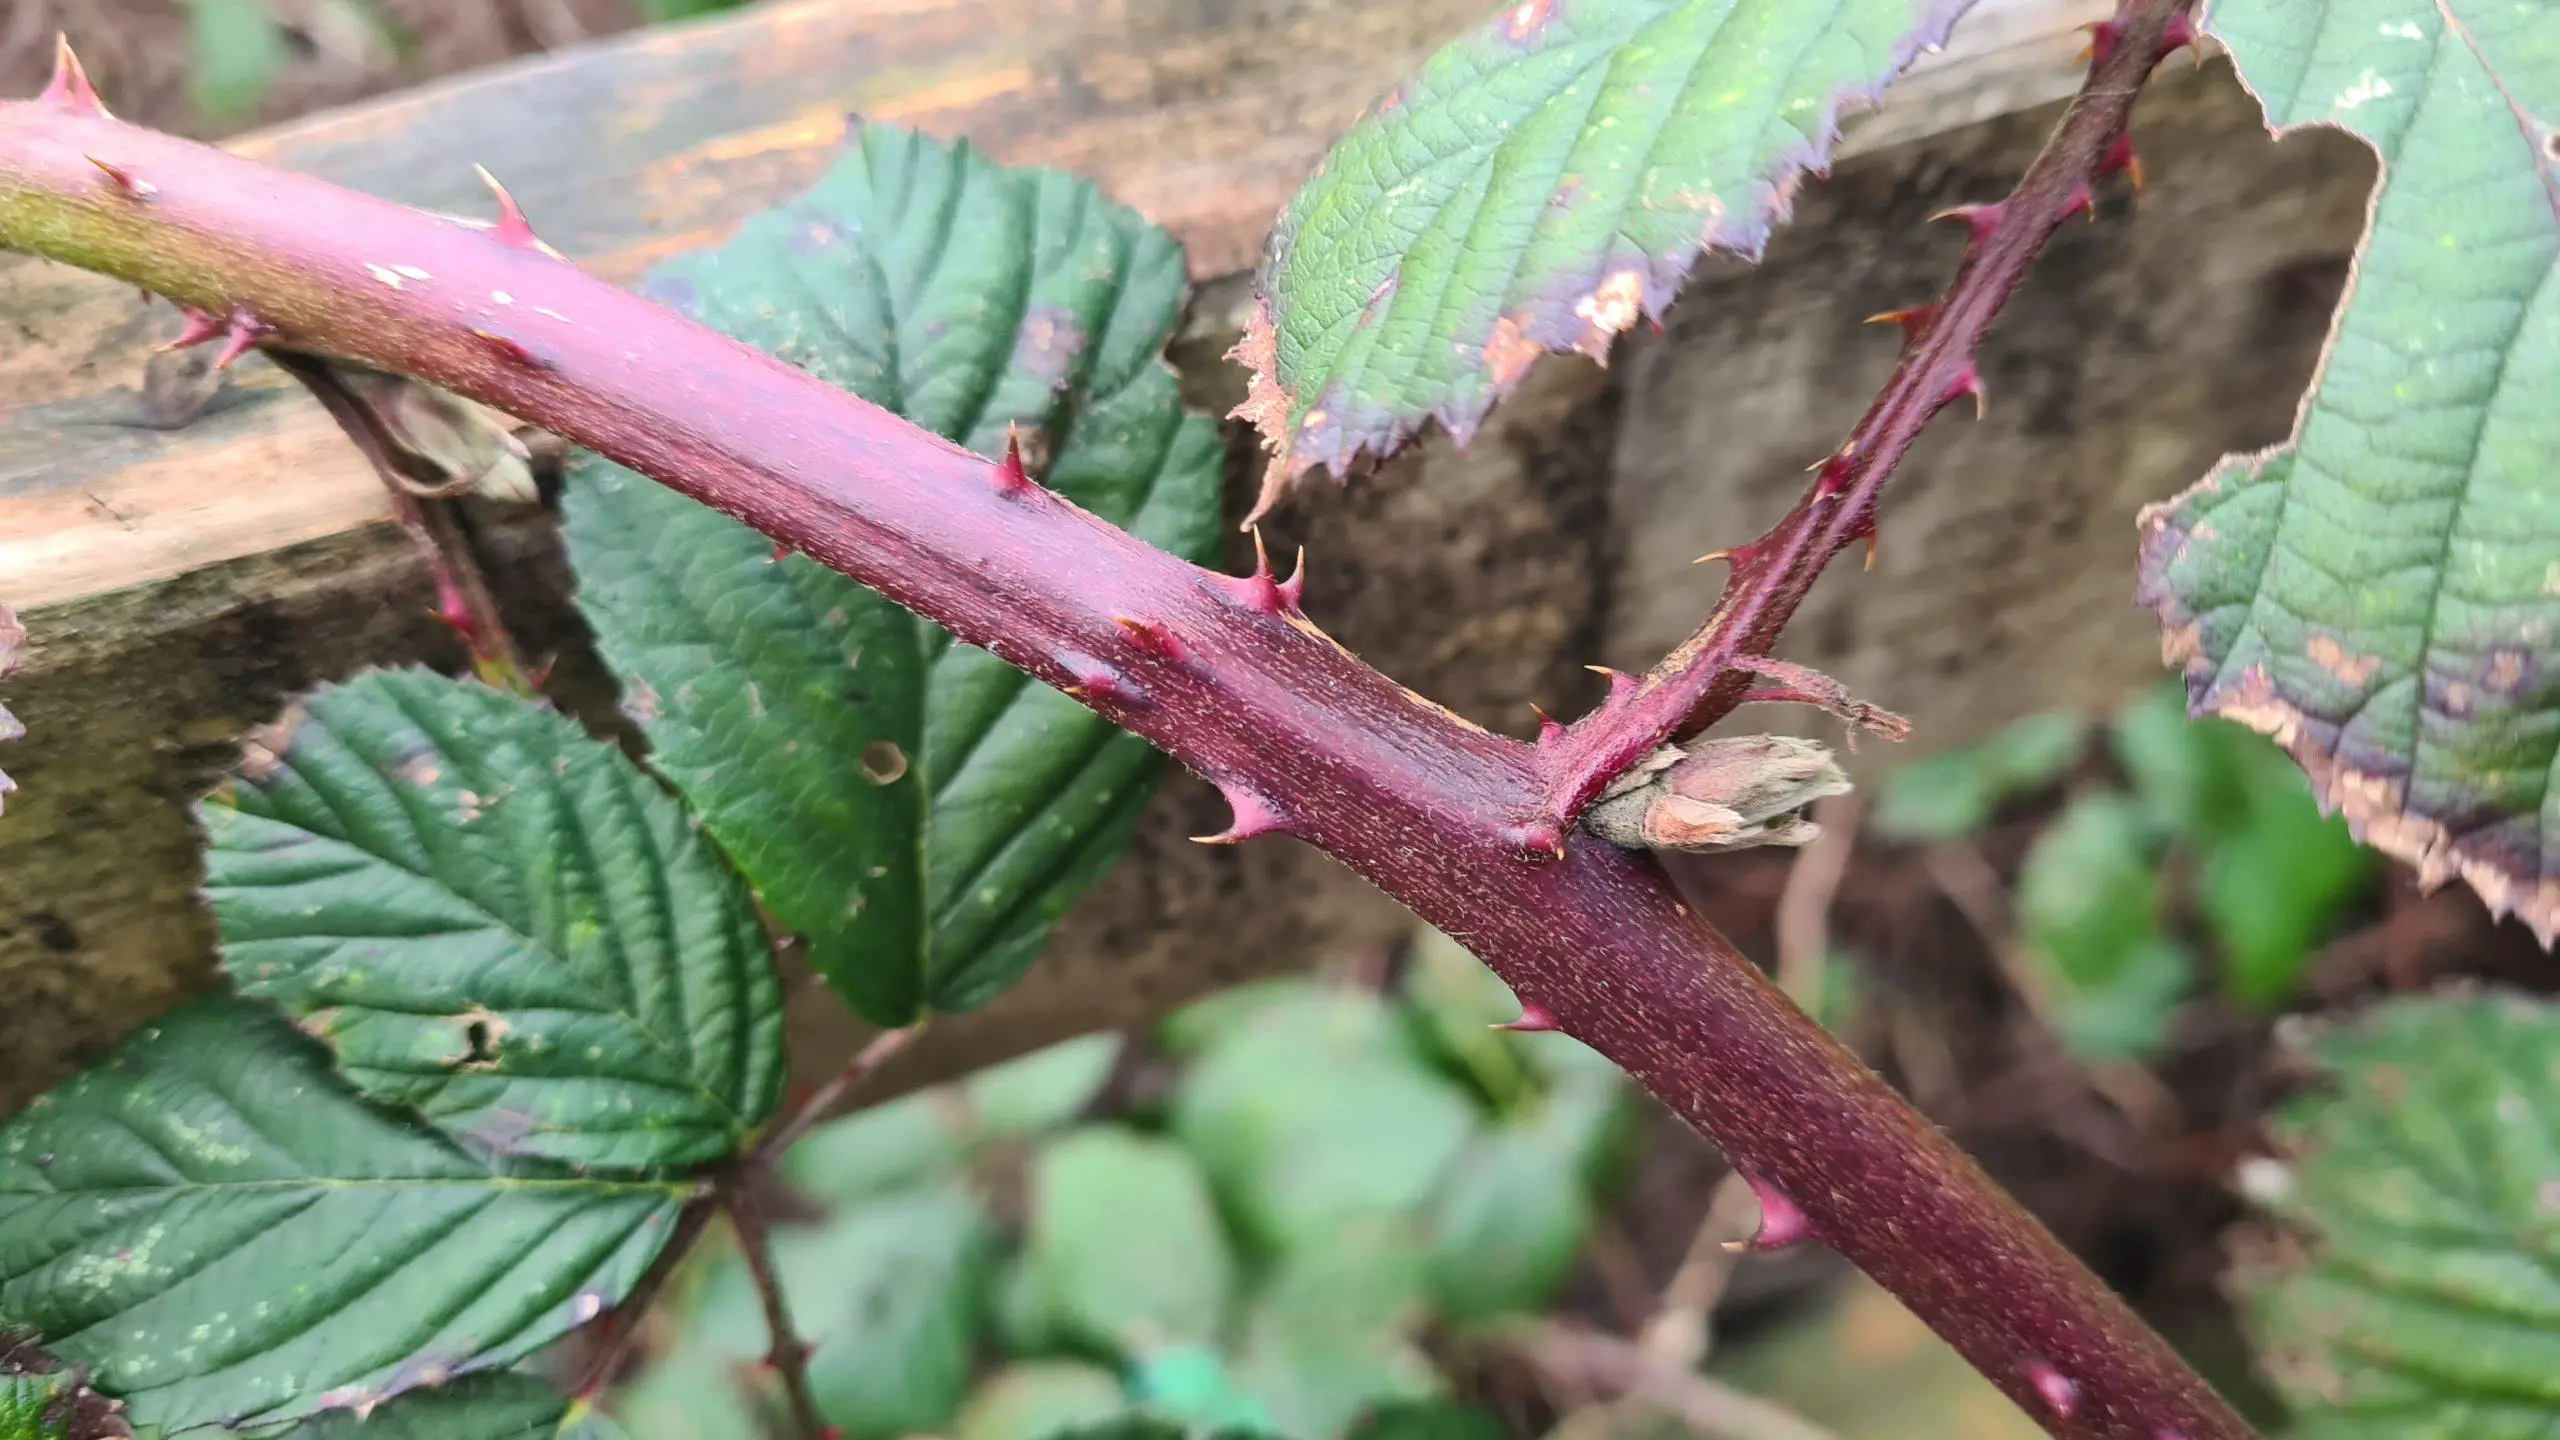 As the bramble stems mature they darken in colour from bright green to a burgundy colour. Now the thorns are stiffer and much sharper too